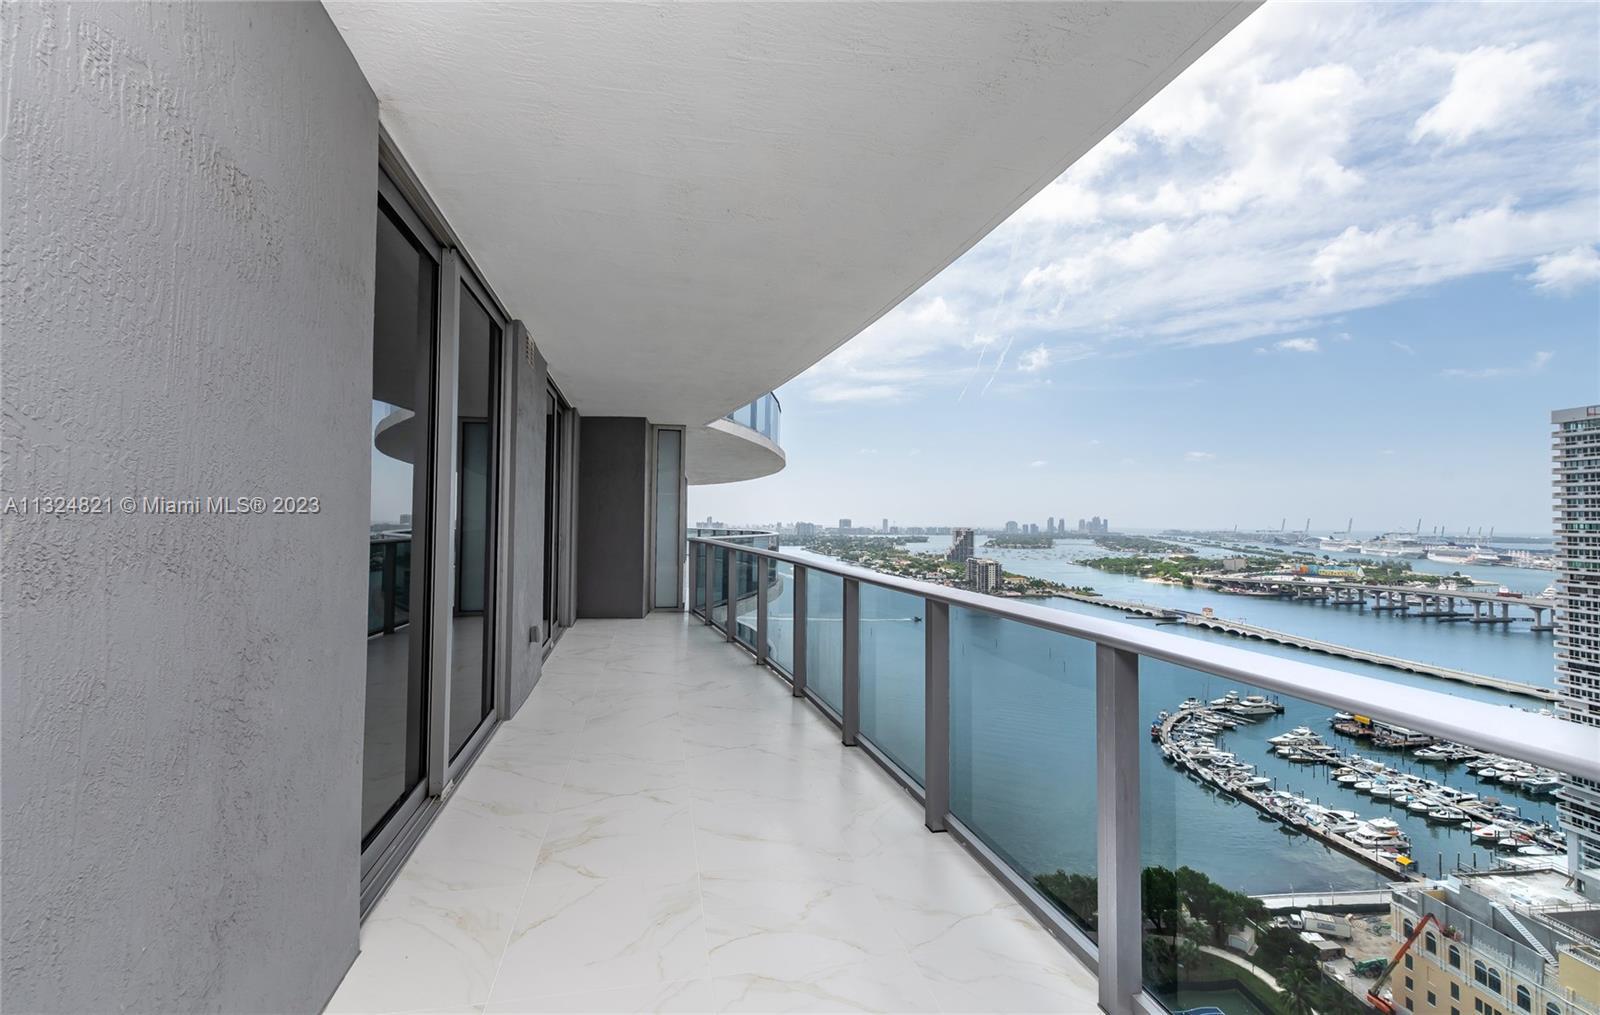 BRIGHT AND SUPER SPACIOUS 3 BED, 3 1/2 BATH UNIT WITH BREATHTAKING VIEWS TO BISCAYNE BAY AT LUXURIOU